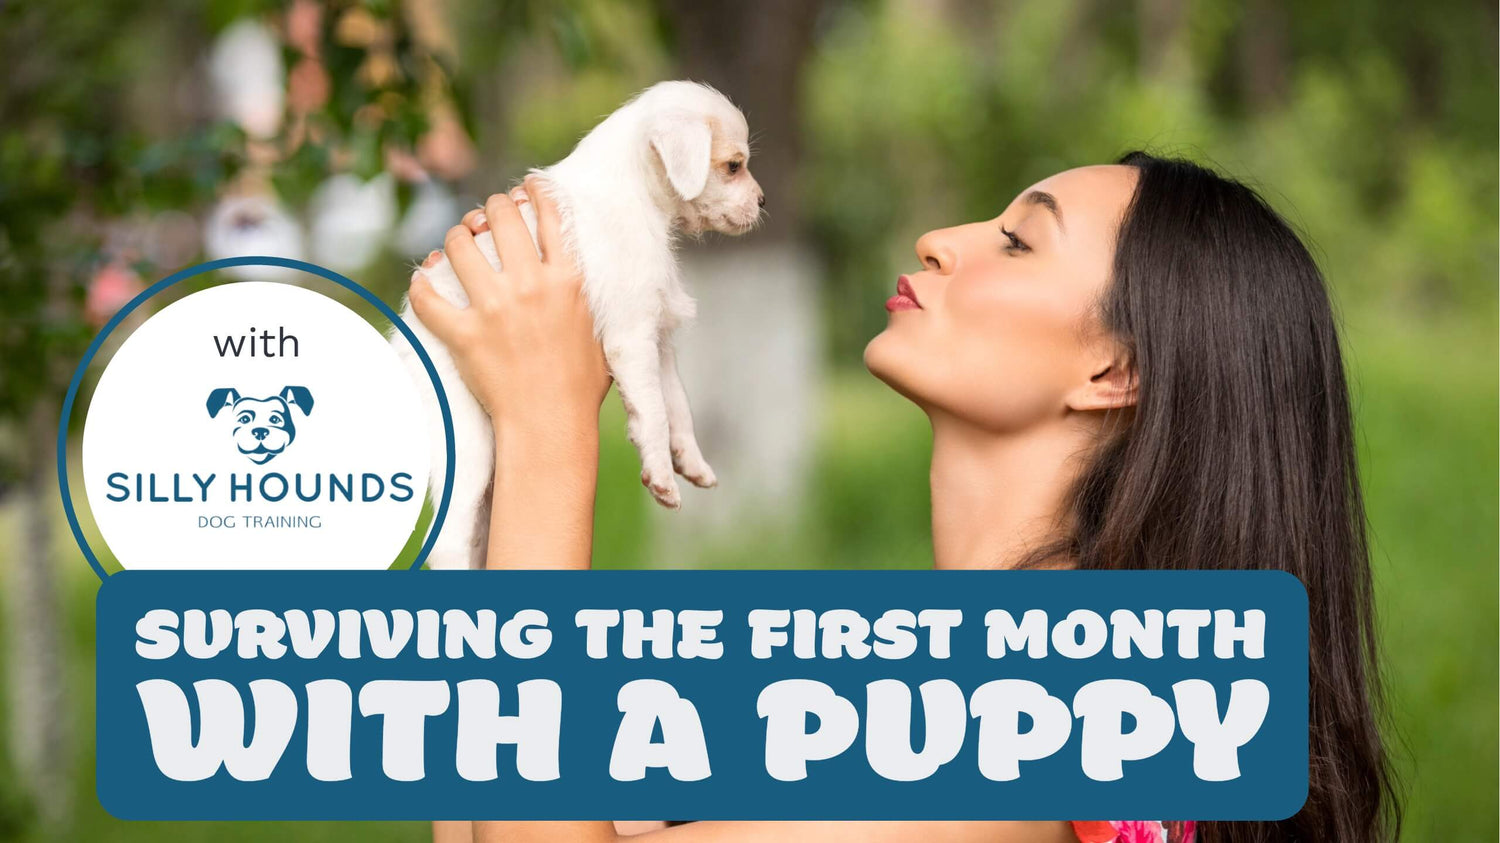 A woman holding a puppy in her hands high up in the airl and a box with text “Surviving First Month with a Puppy”